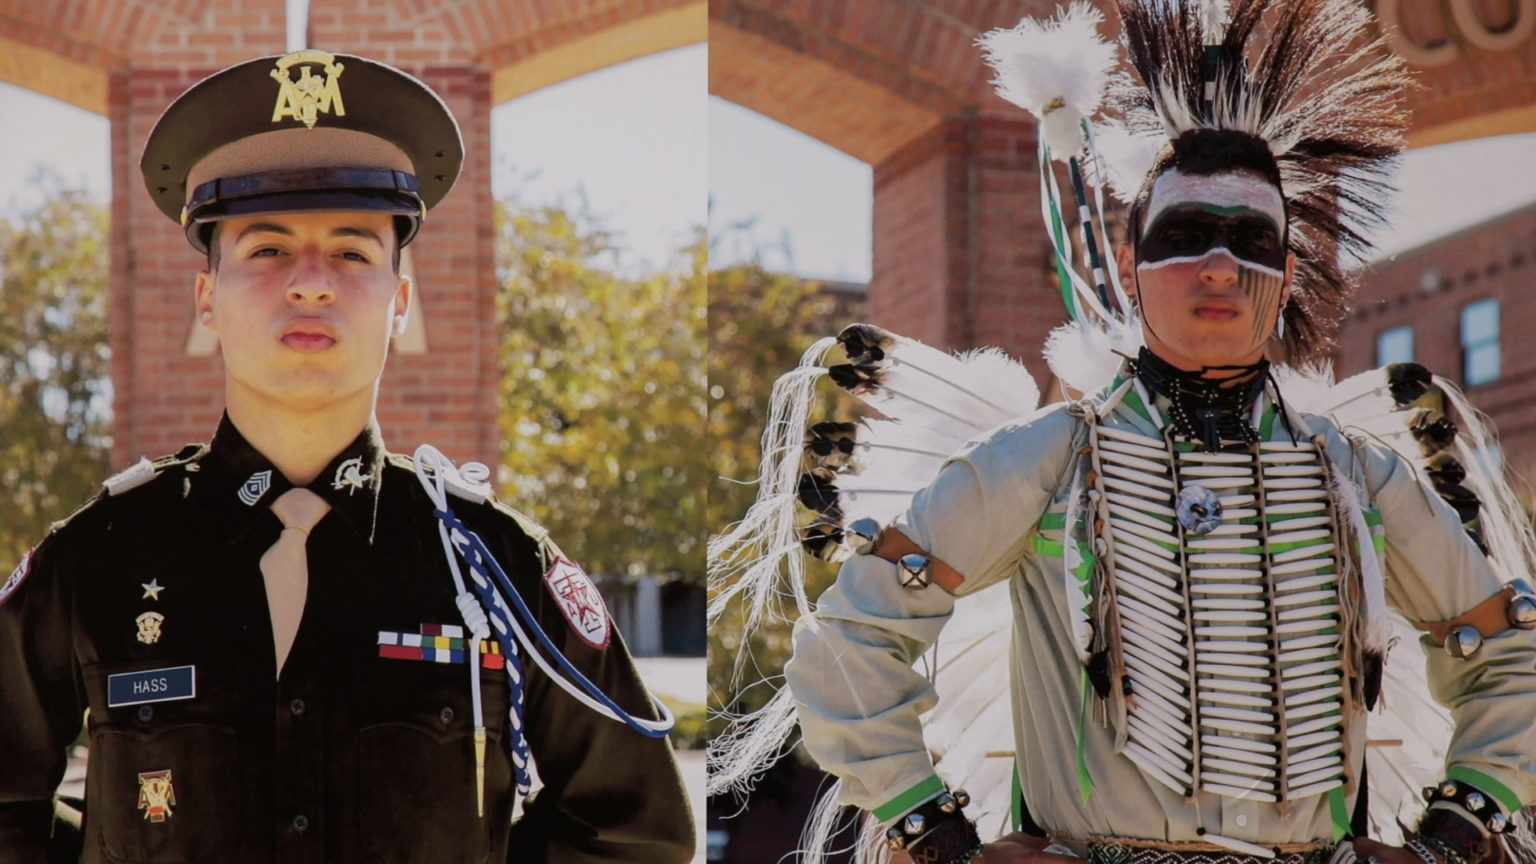 Side-by-side photos of a man showing him wearing a Corps of Cadets uniform on the left and a set of traditional Native American regalia on the right